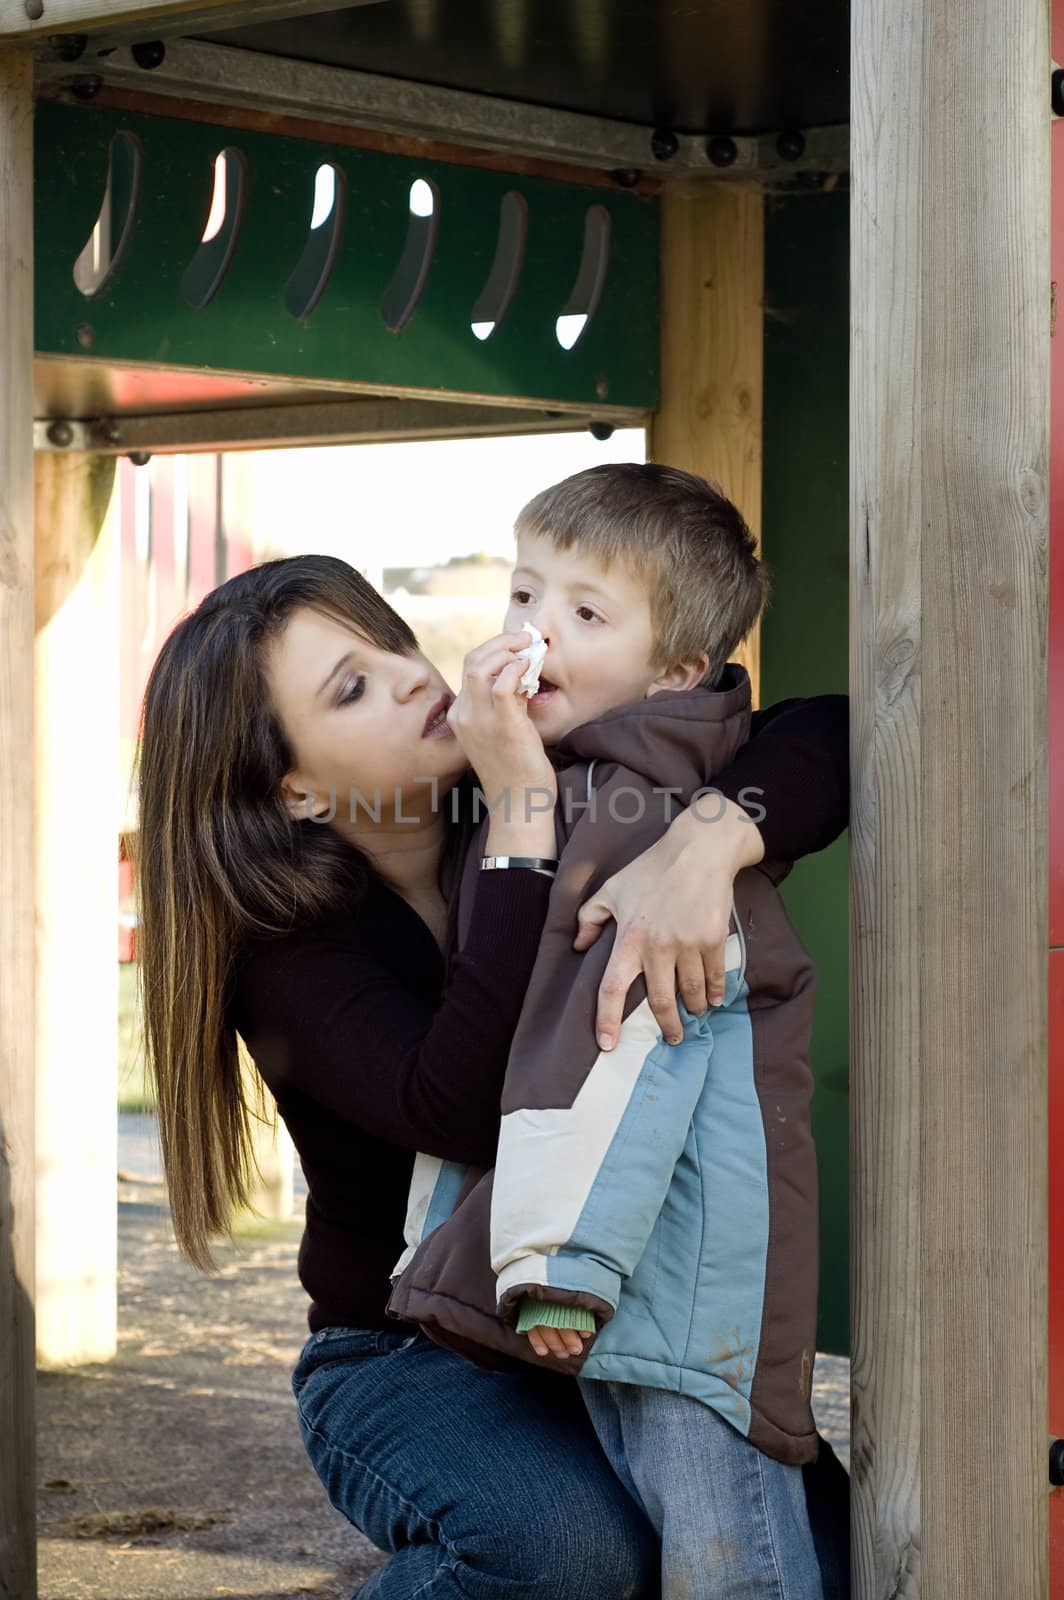 Mum caringly wipes her son's nose in a playground